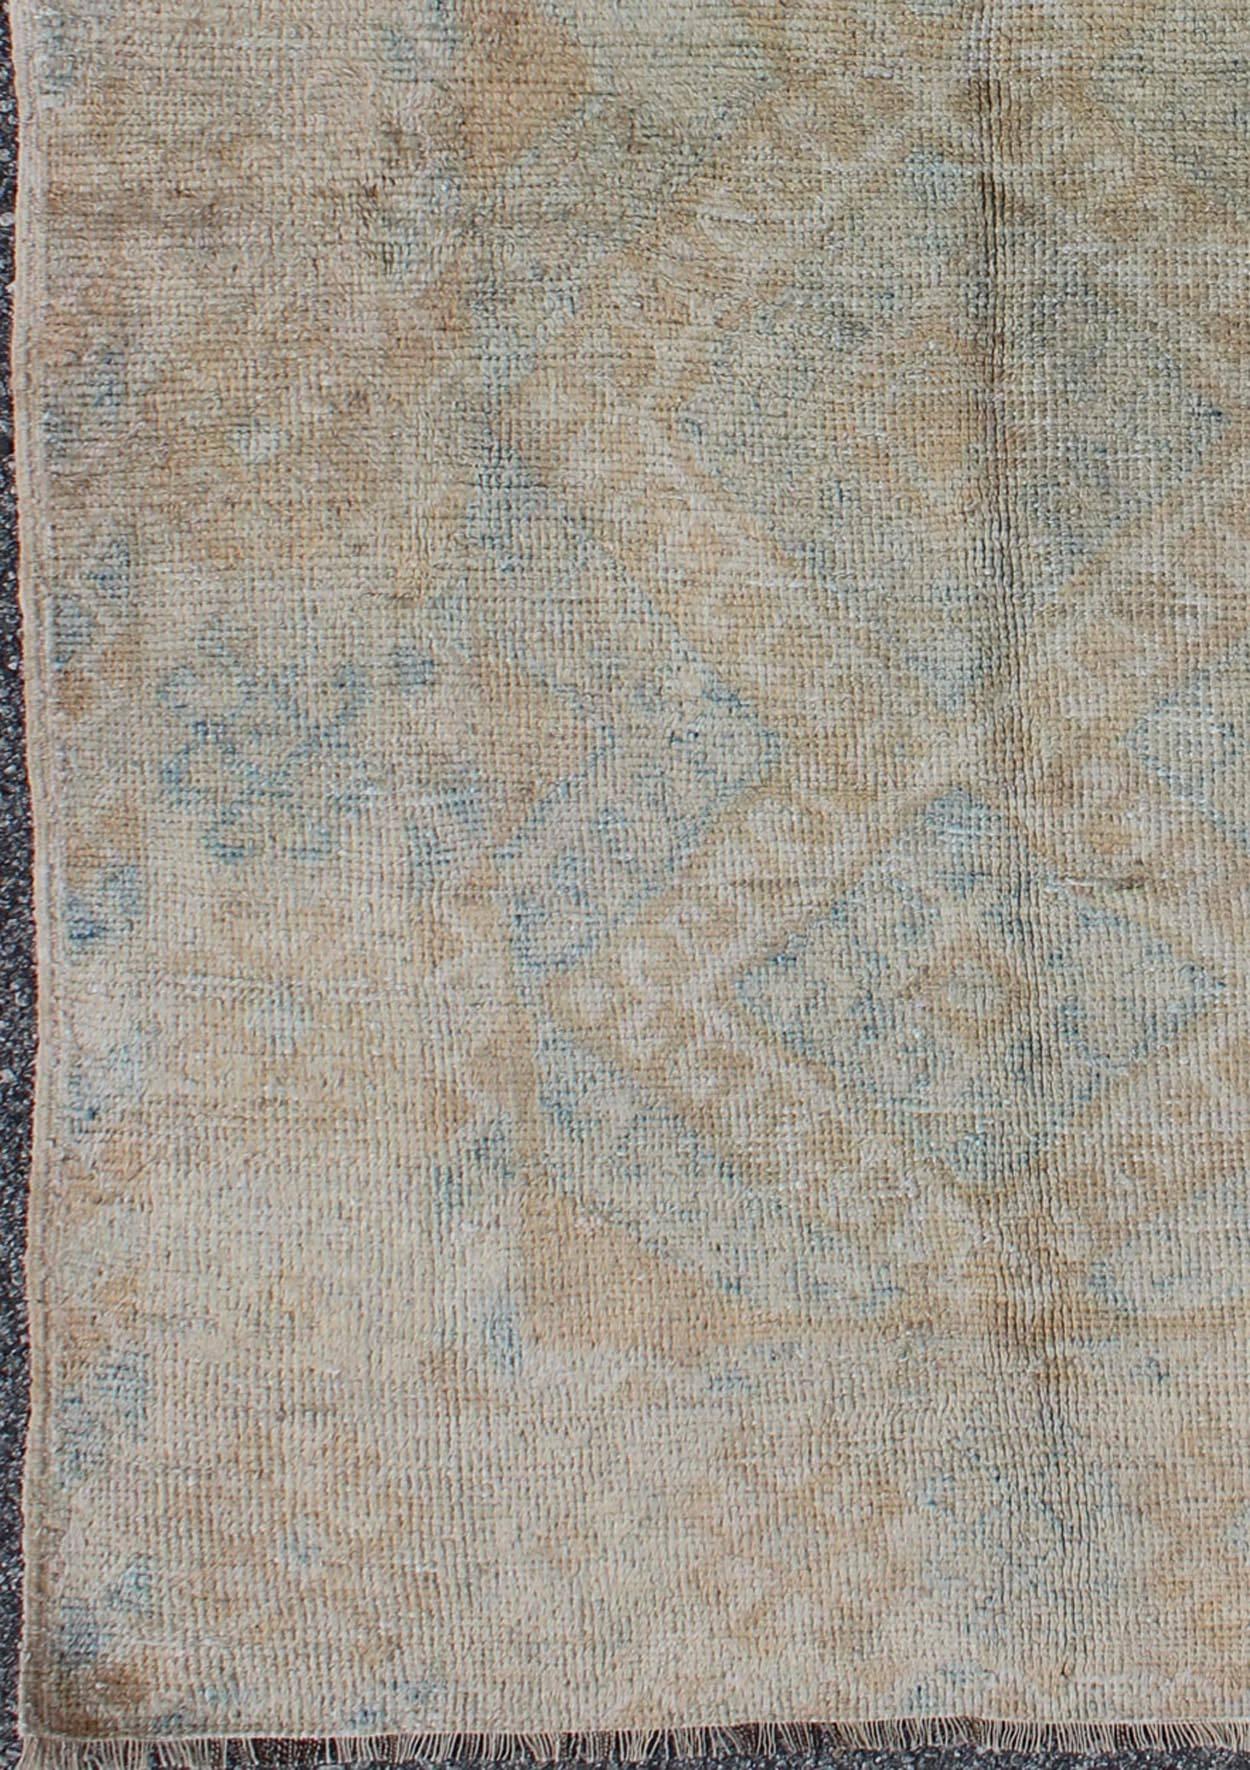 Turkish Oushak Rug With Three Central Medallions in Muted Taupe and Pale Blue

Turkish Oushak Rug With Three Central Medallions in Muted Taupe and Pale Blue. Keivan Woven Arts / rug TU-UGU-136092, country of origin / type: Turkey / Oushak, circa